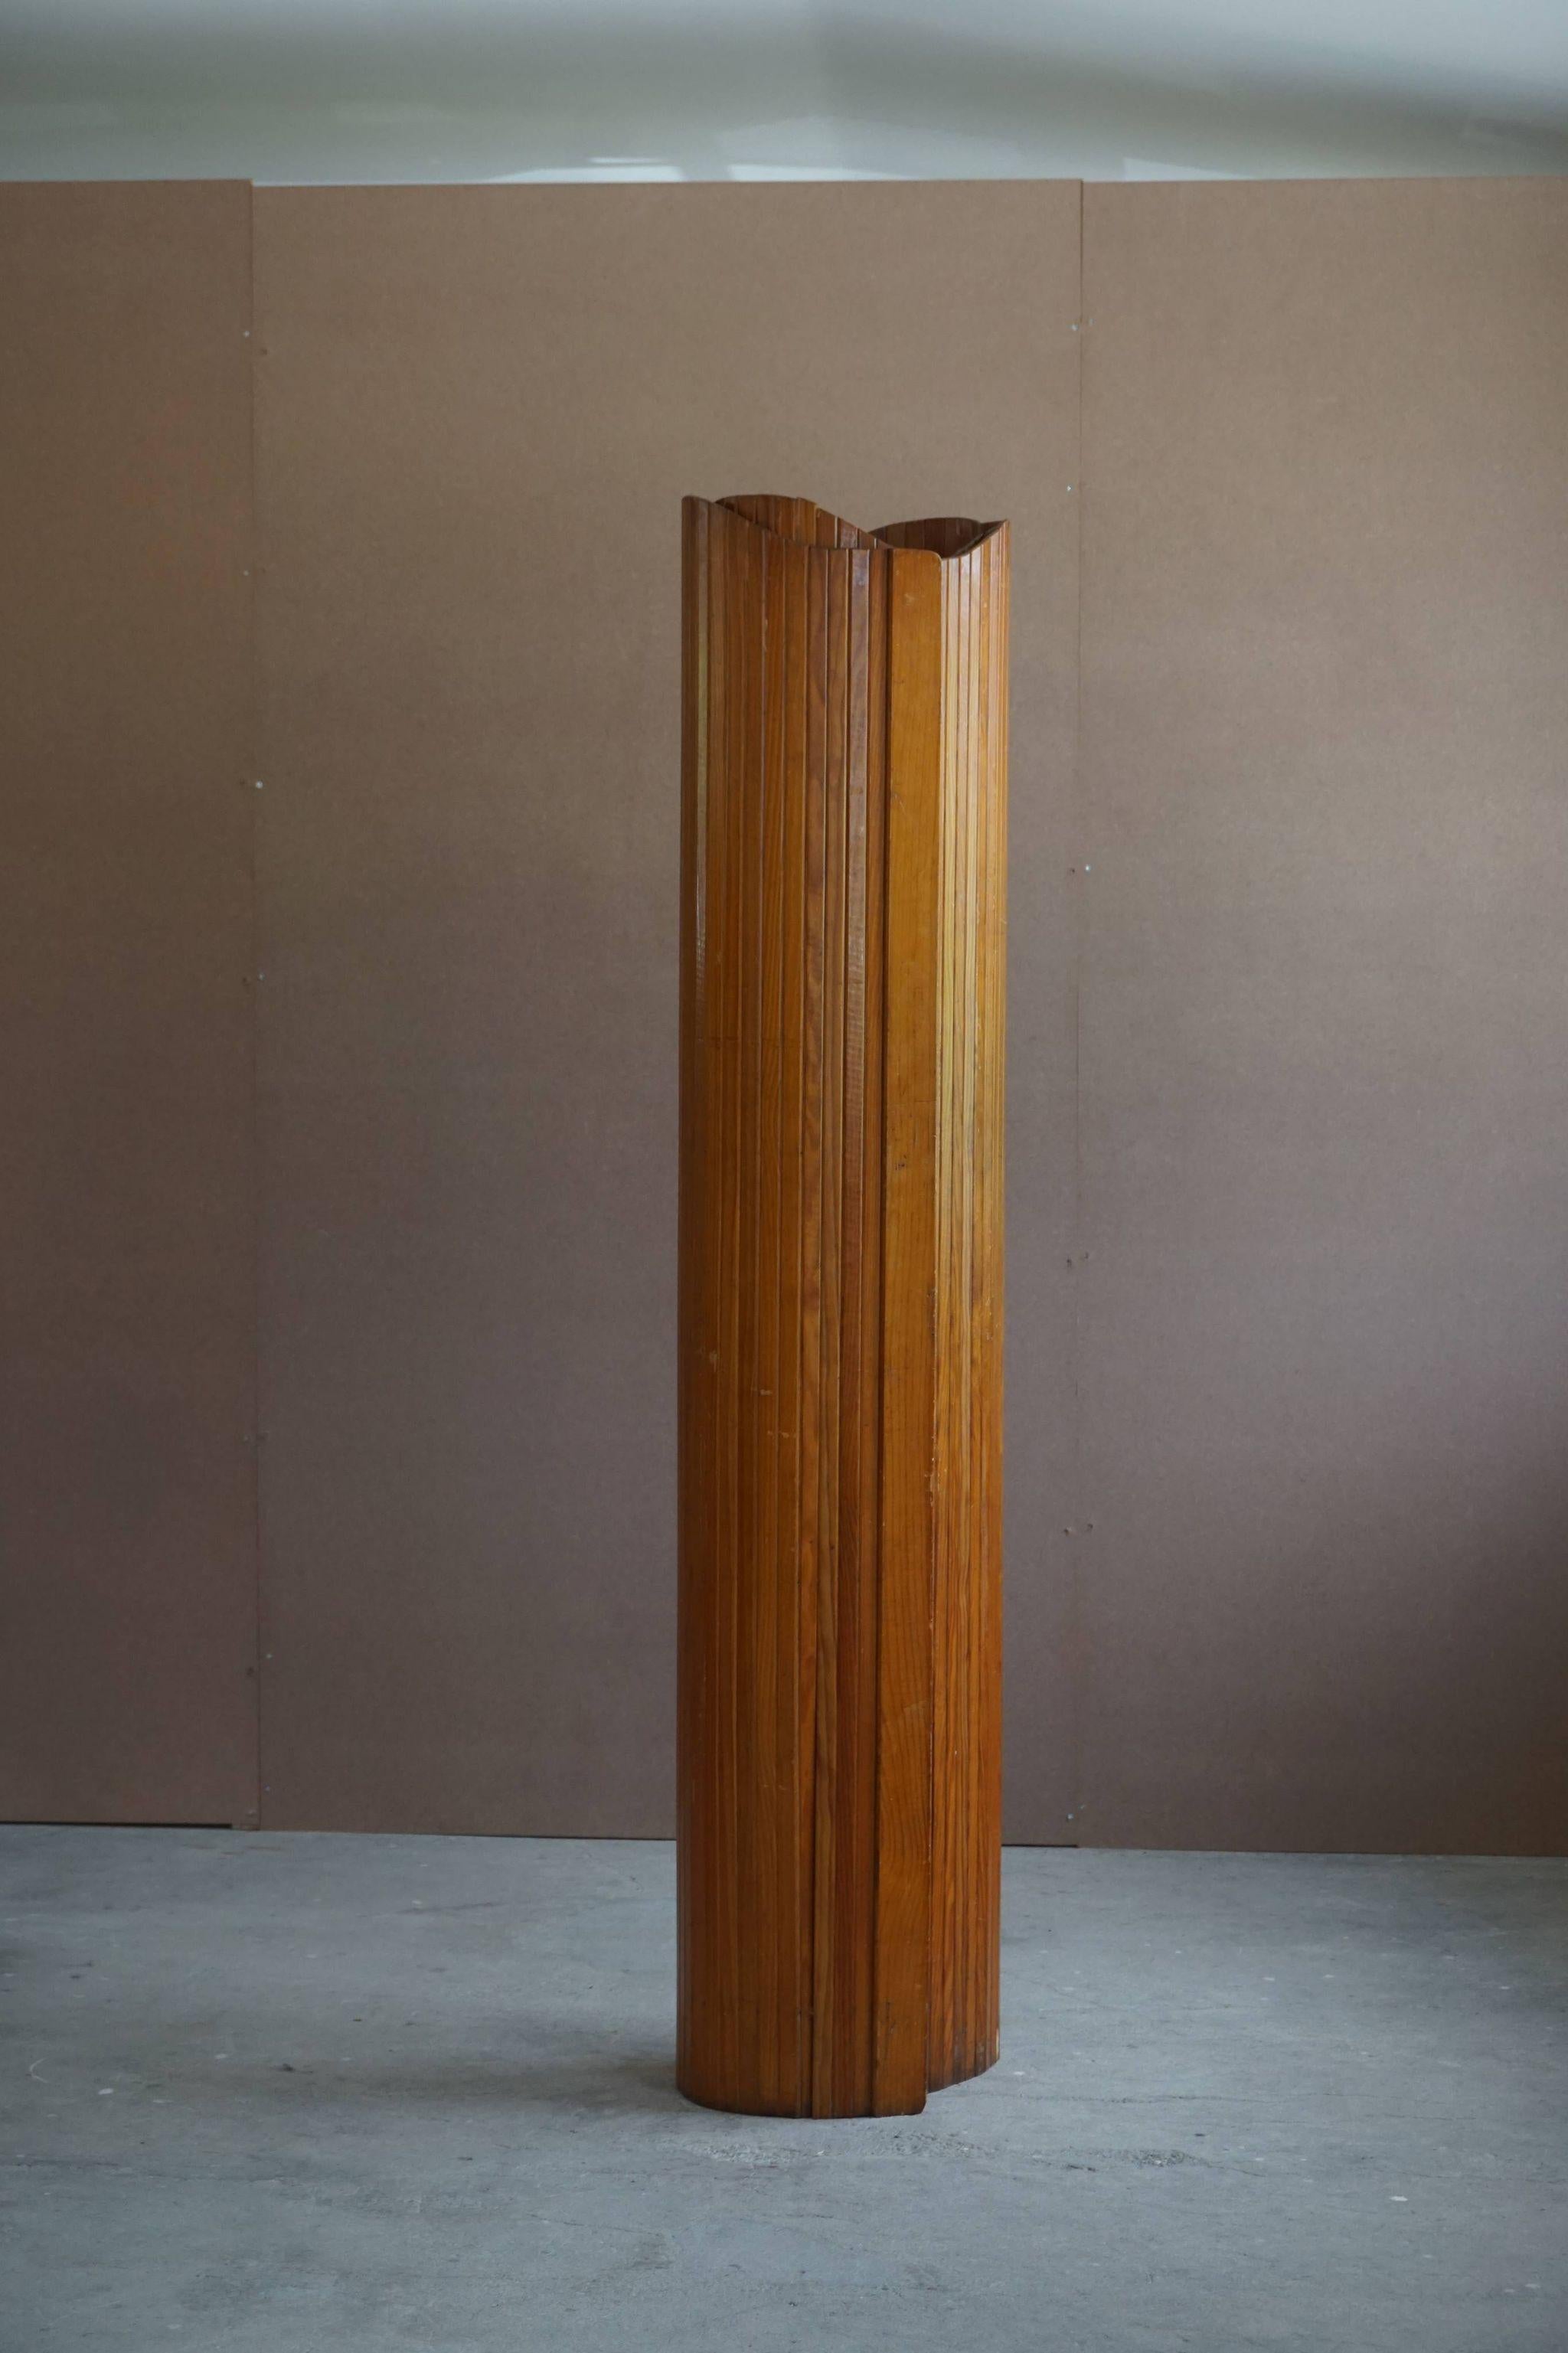 Stained French Art Deco Room Divider in Patinated Pine by Firm Baumann, Paris, 1940s